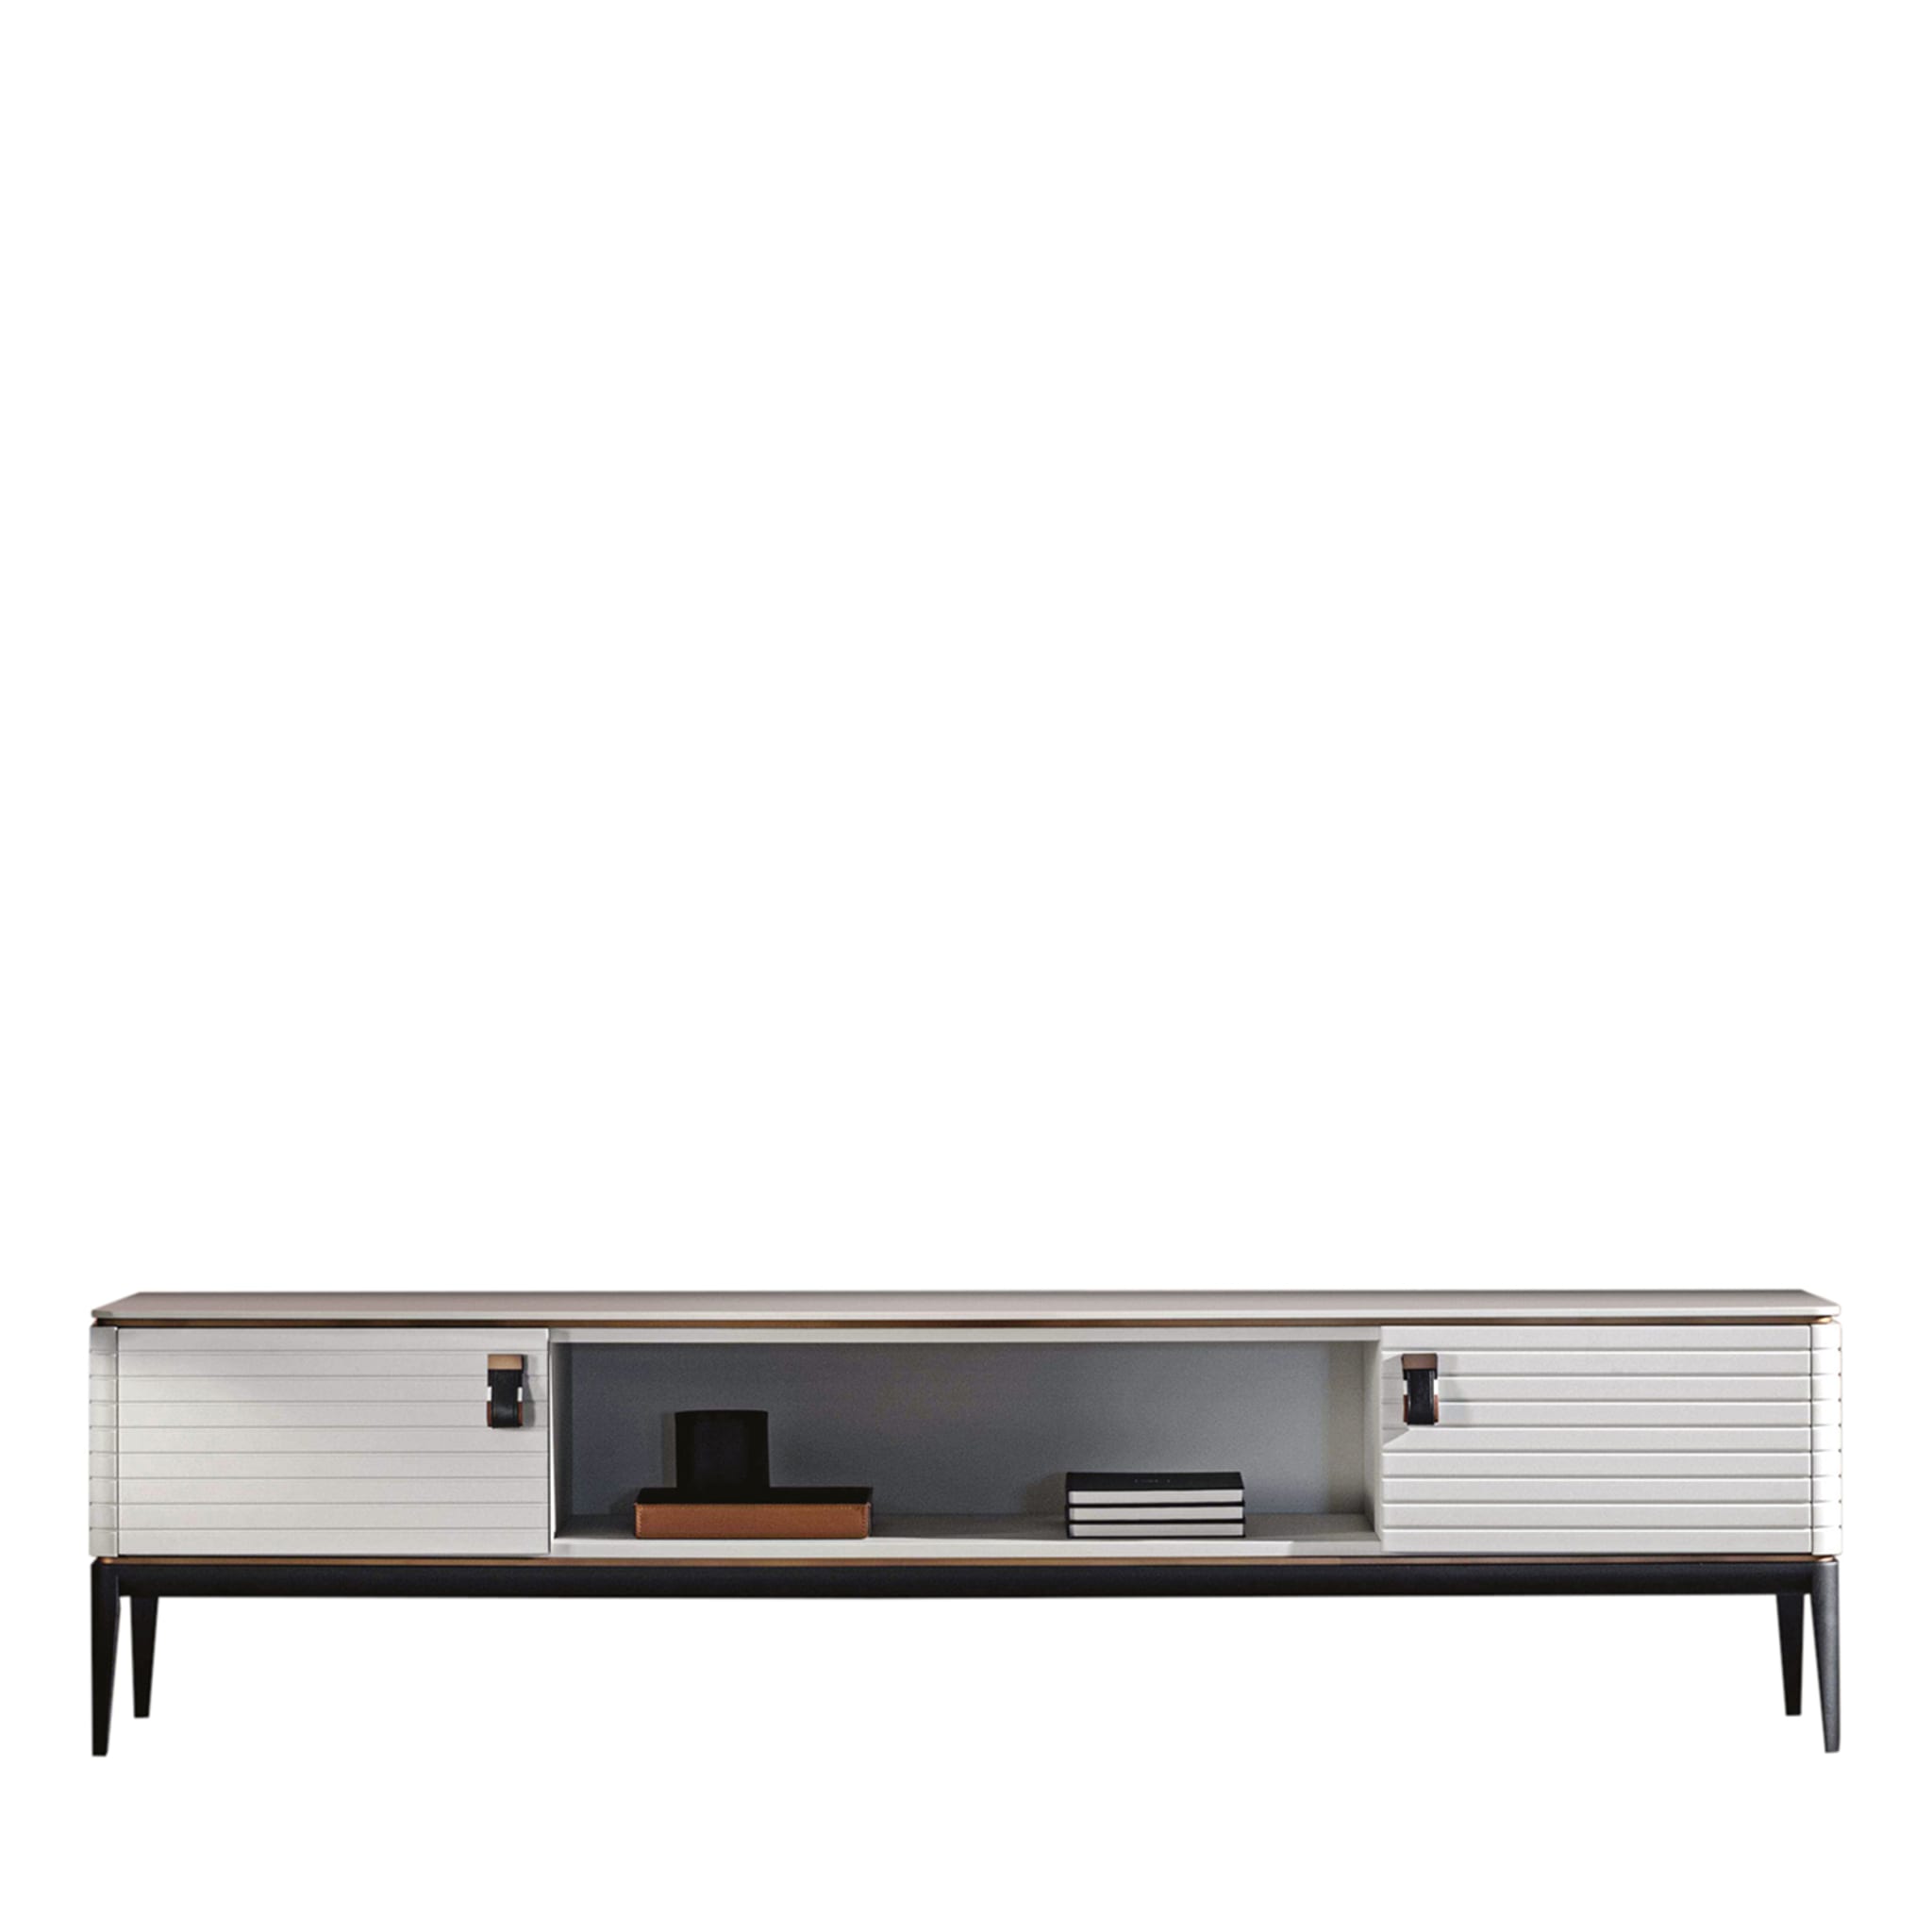 Levanzo 2-Drawer Low White Sideboard - Main view